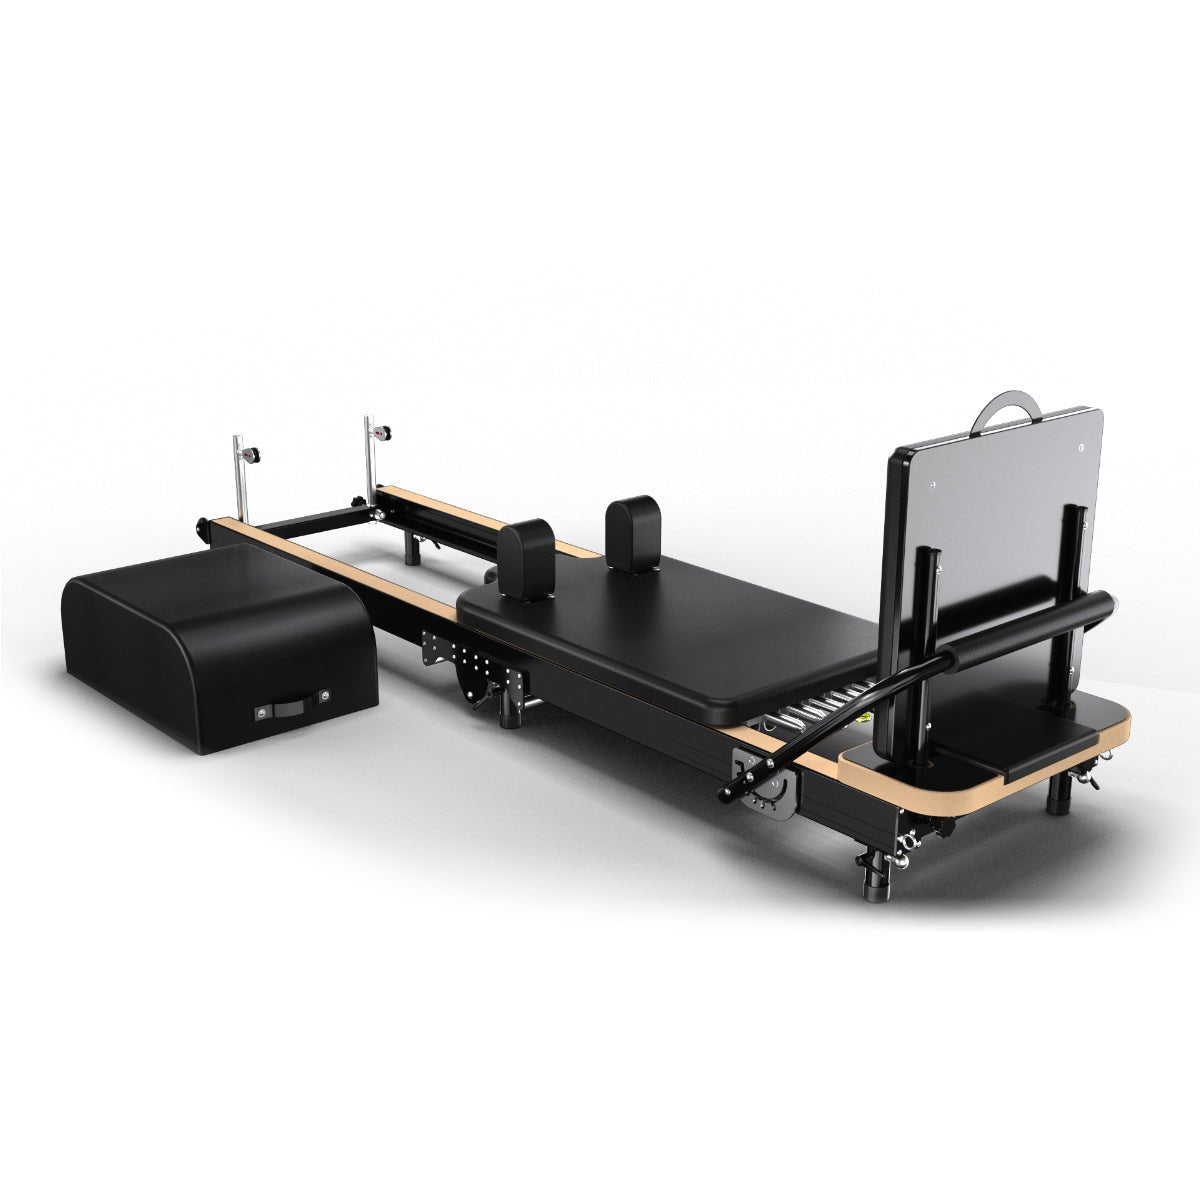 Pilates Reformer Machine, Foldable Pilates Machine Equipment for Home,  Exercise Yoga Equipment, Multifunctional Foldable Yoga Bed, Adjustable  Intensity Pilates Bed : : Sports & Outdoors